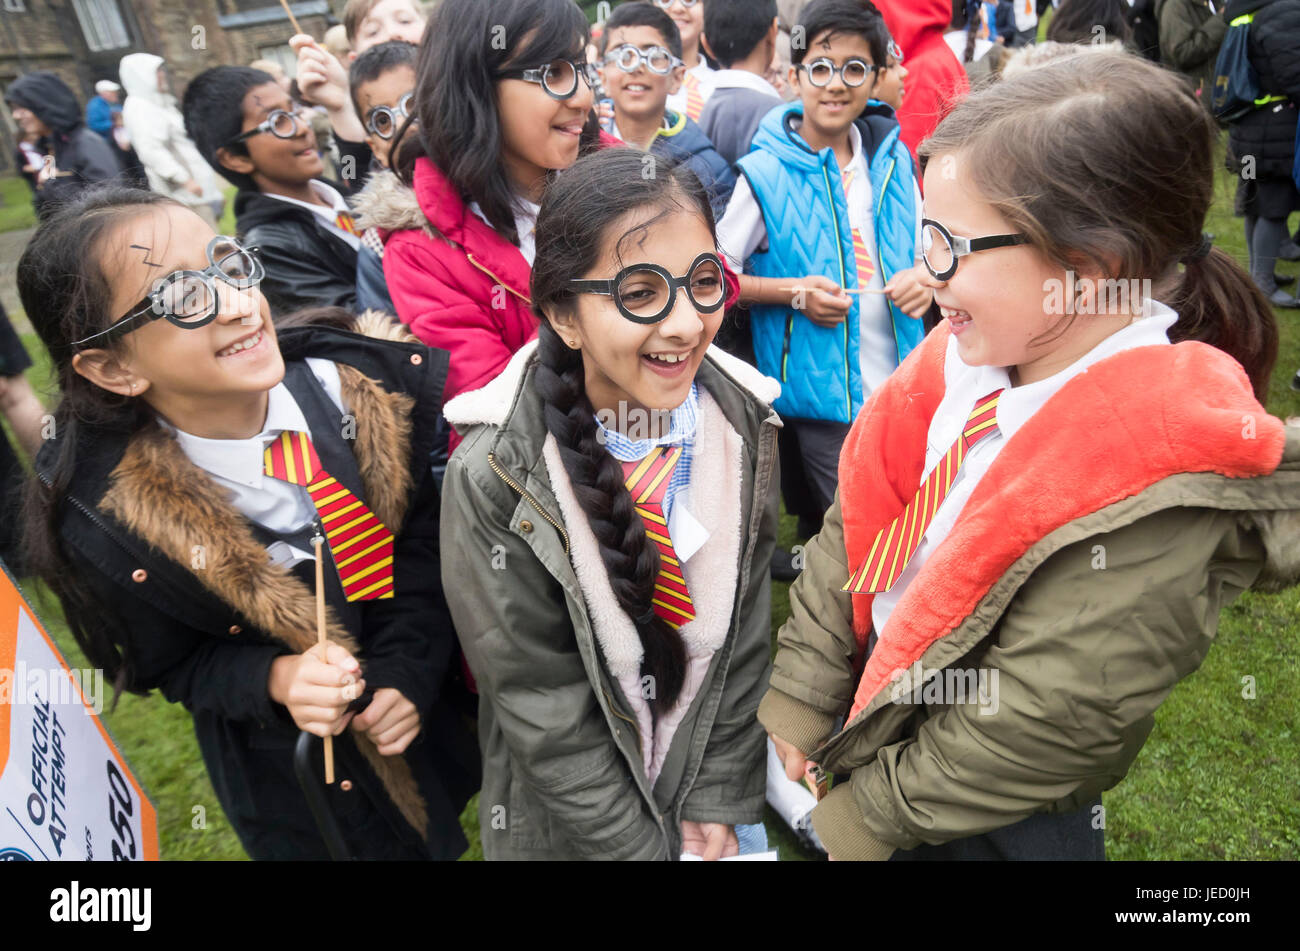 Children dressed as Harry Potter at Smithills Hall in Bolton, before an attempt to break the Guinness World Record for the Largest Gathering of People Dressed as the boy wizard. Stock Photo